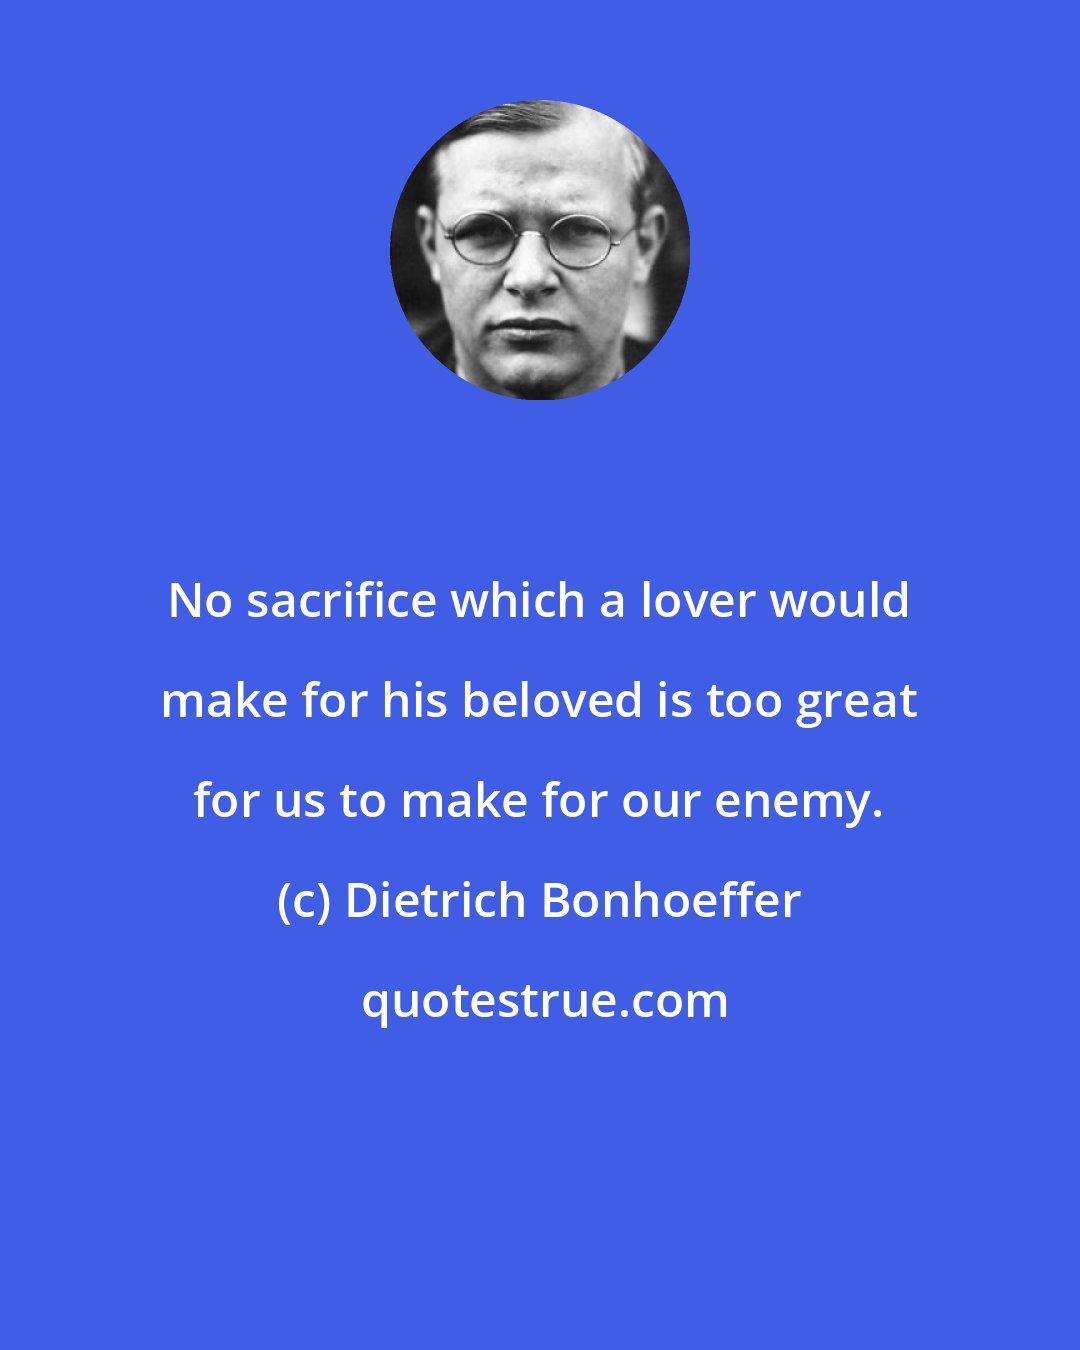 Dietrich Bonhoeffer: No sacrifice which a lover would make for his beloved is too great for us to make for our enemy.